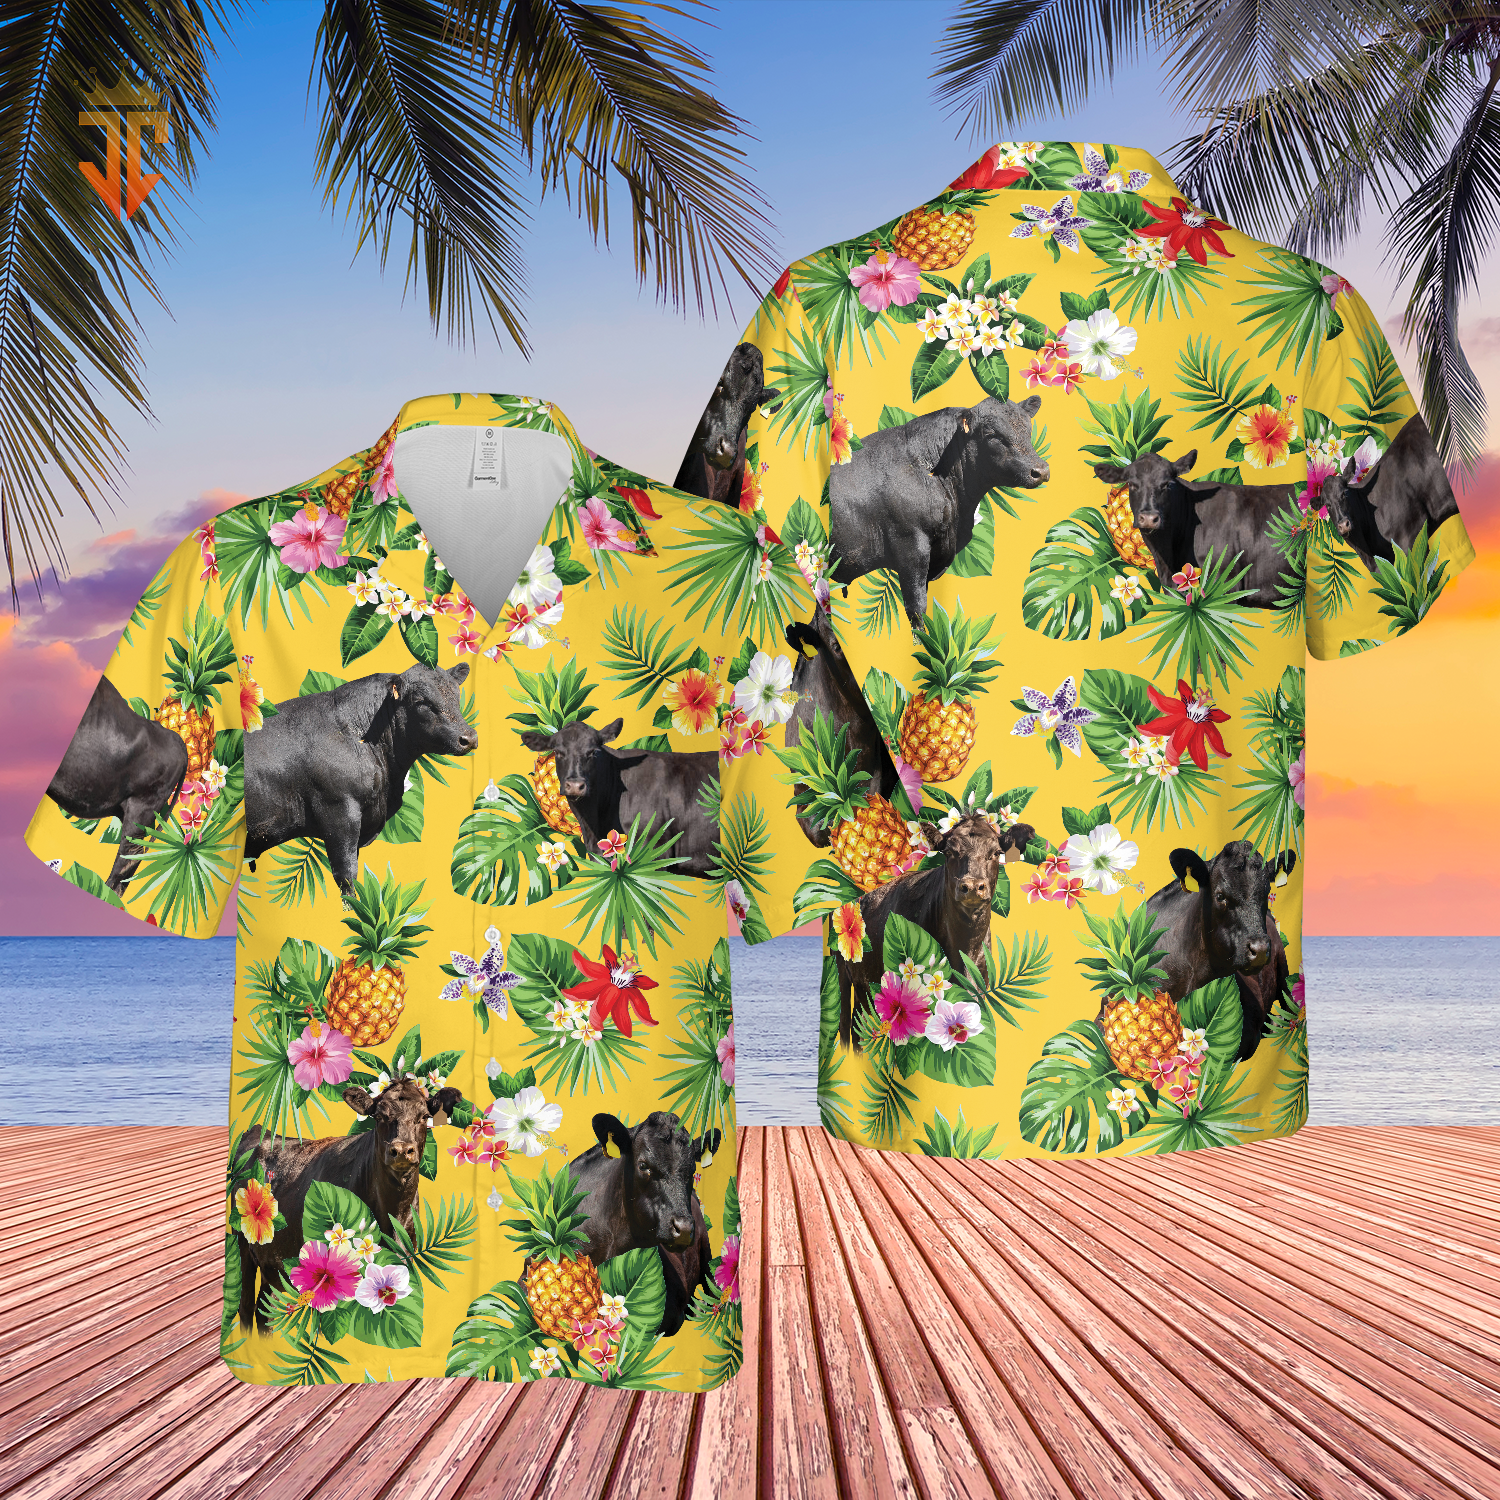 Personalized Name Black Angus Cattle Pineapples All Over Printed 3D Hawaiian Shirt